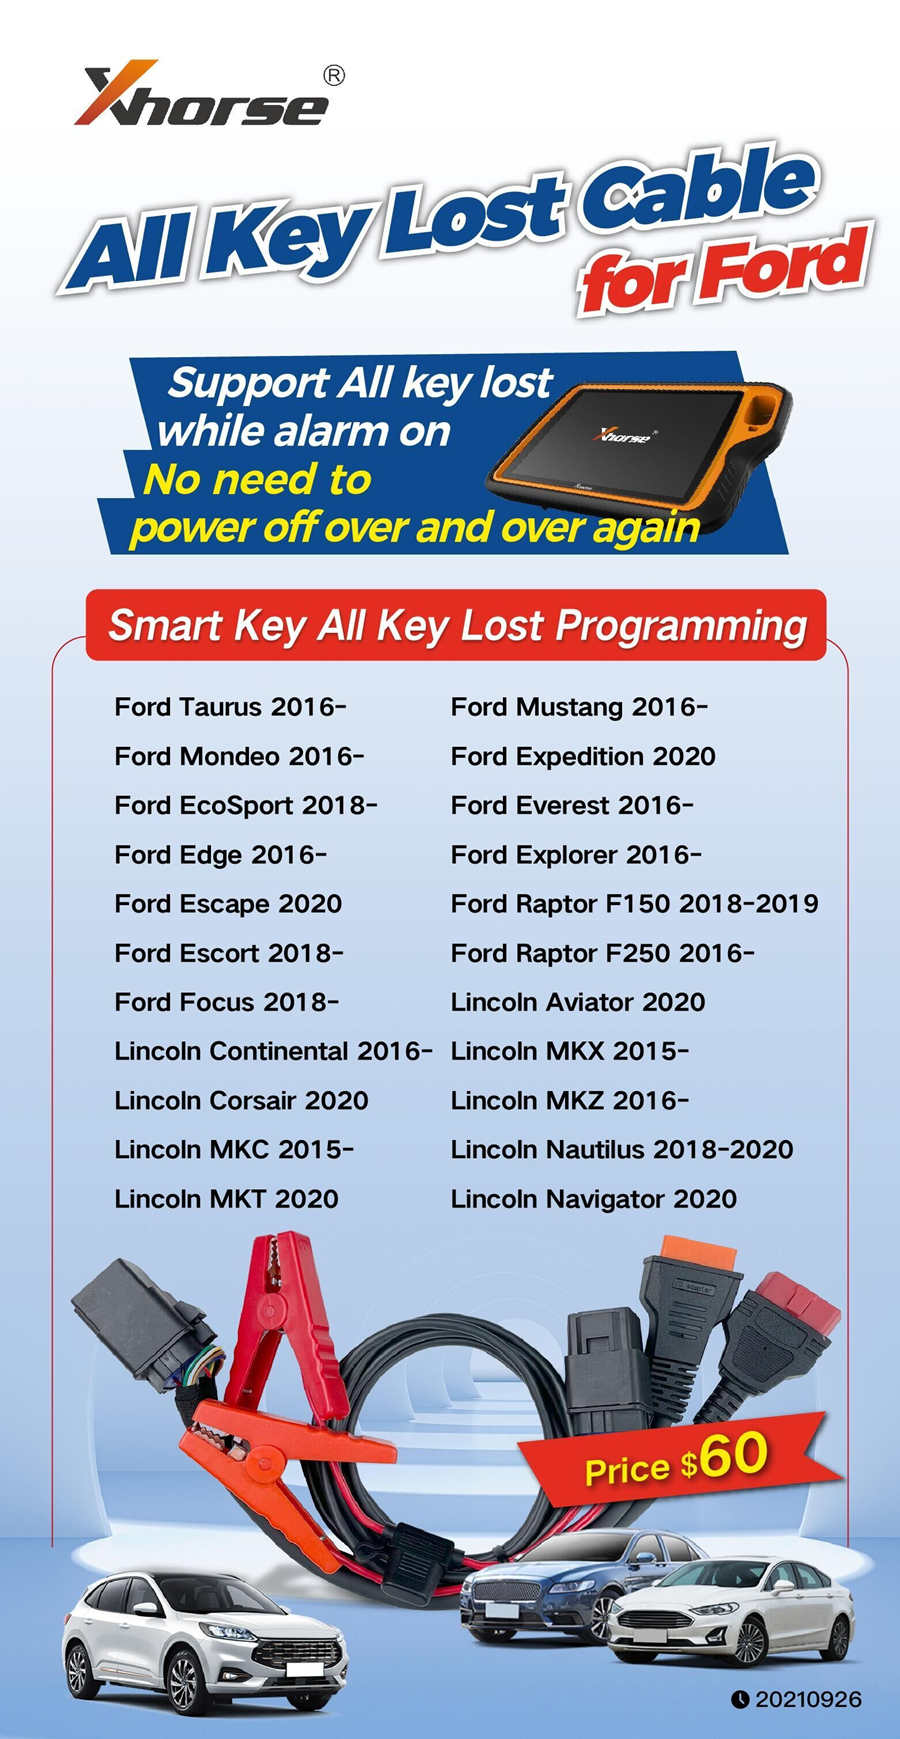 Xhorse All Key Lost Cable for Ford Smart Key Programming